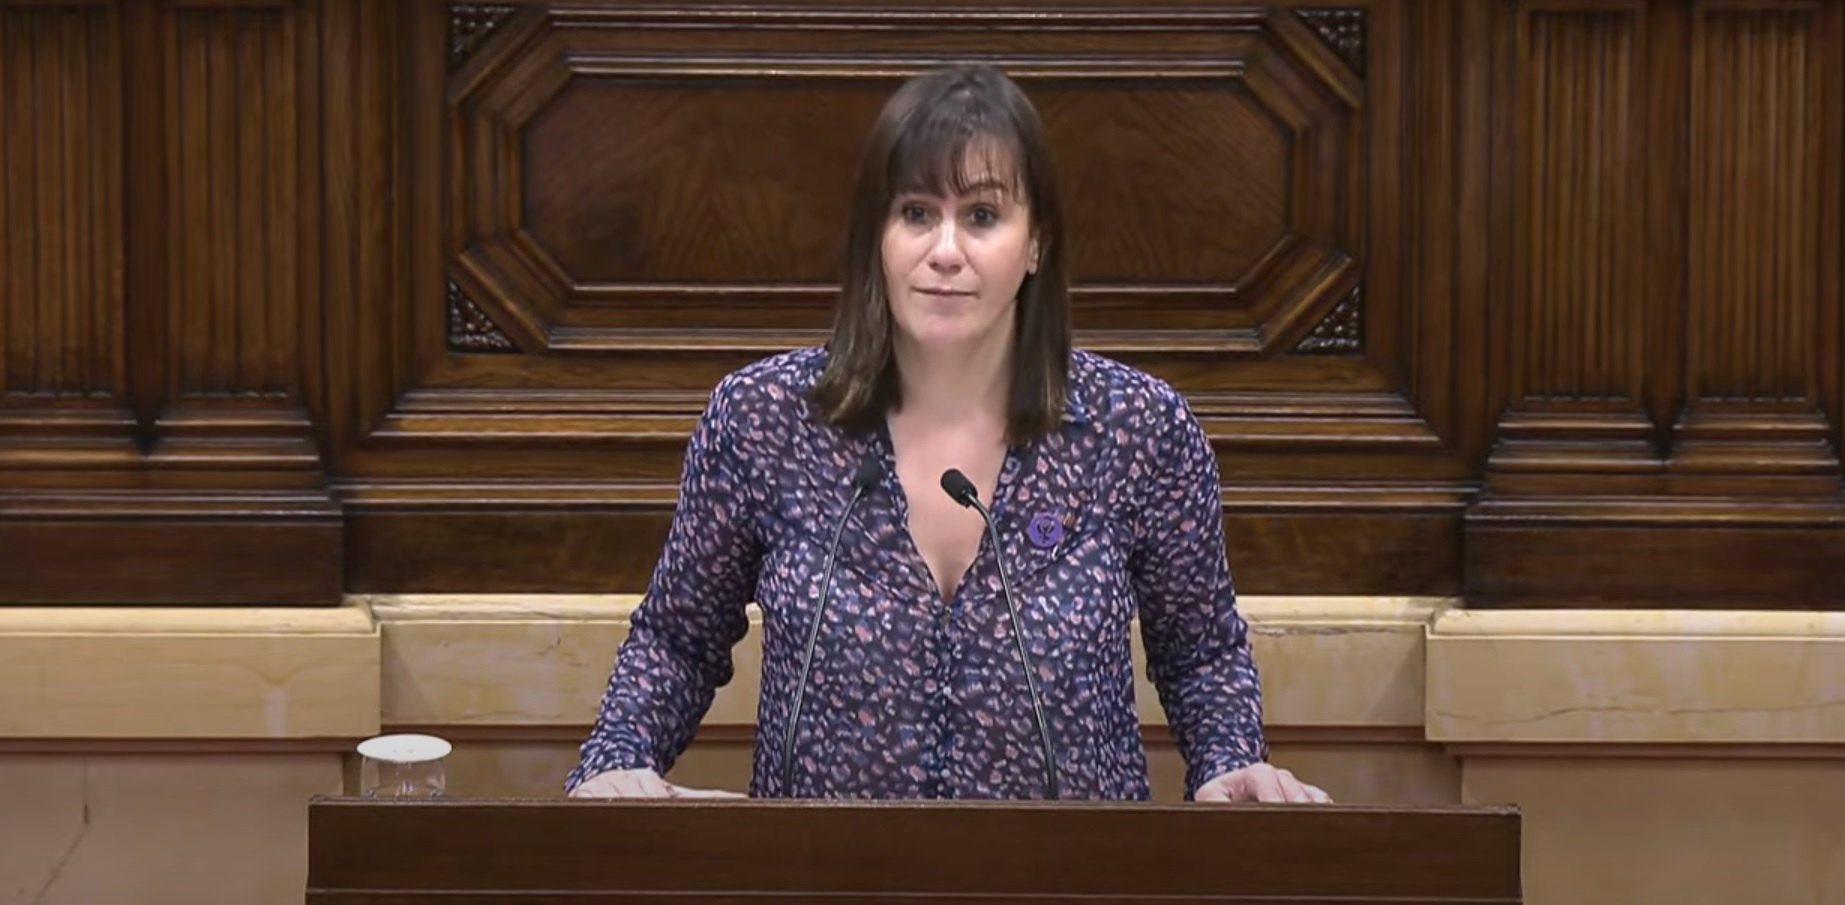 Catalan MP Aurora Madaula's accusations of "silent sexism" re-open old conflicts in Junts